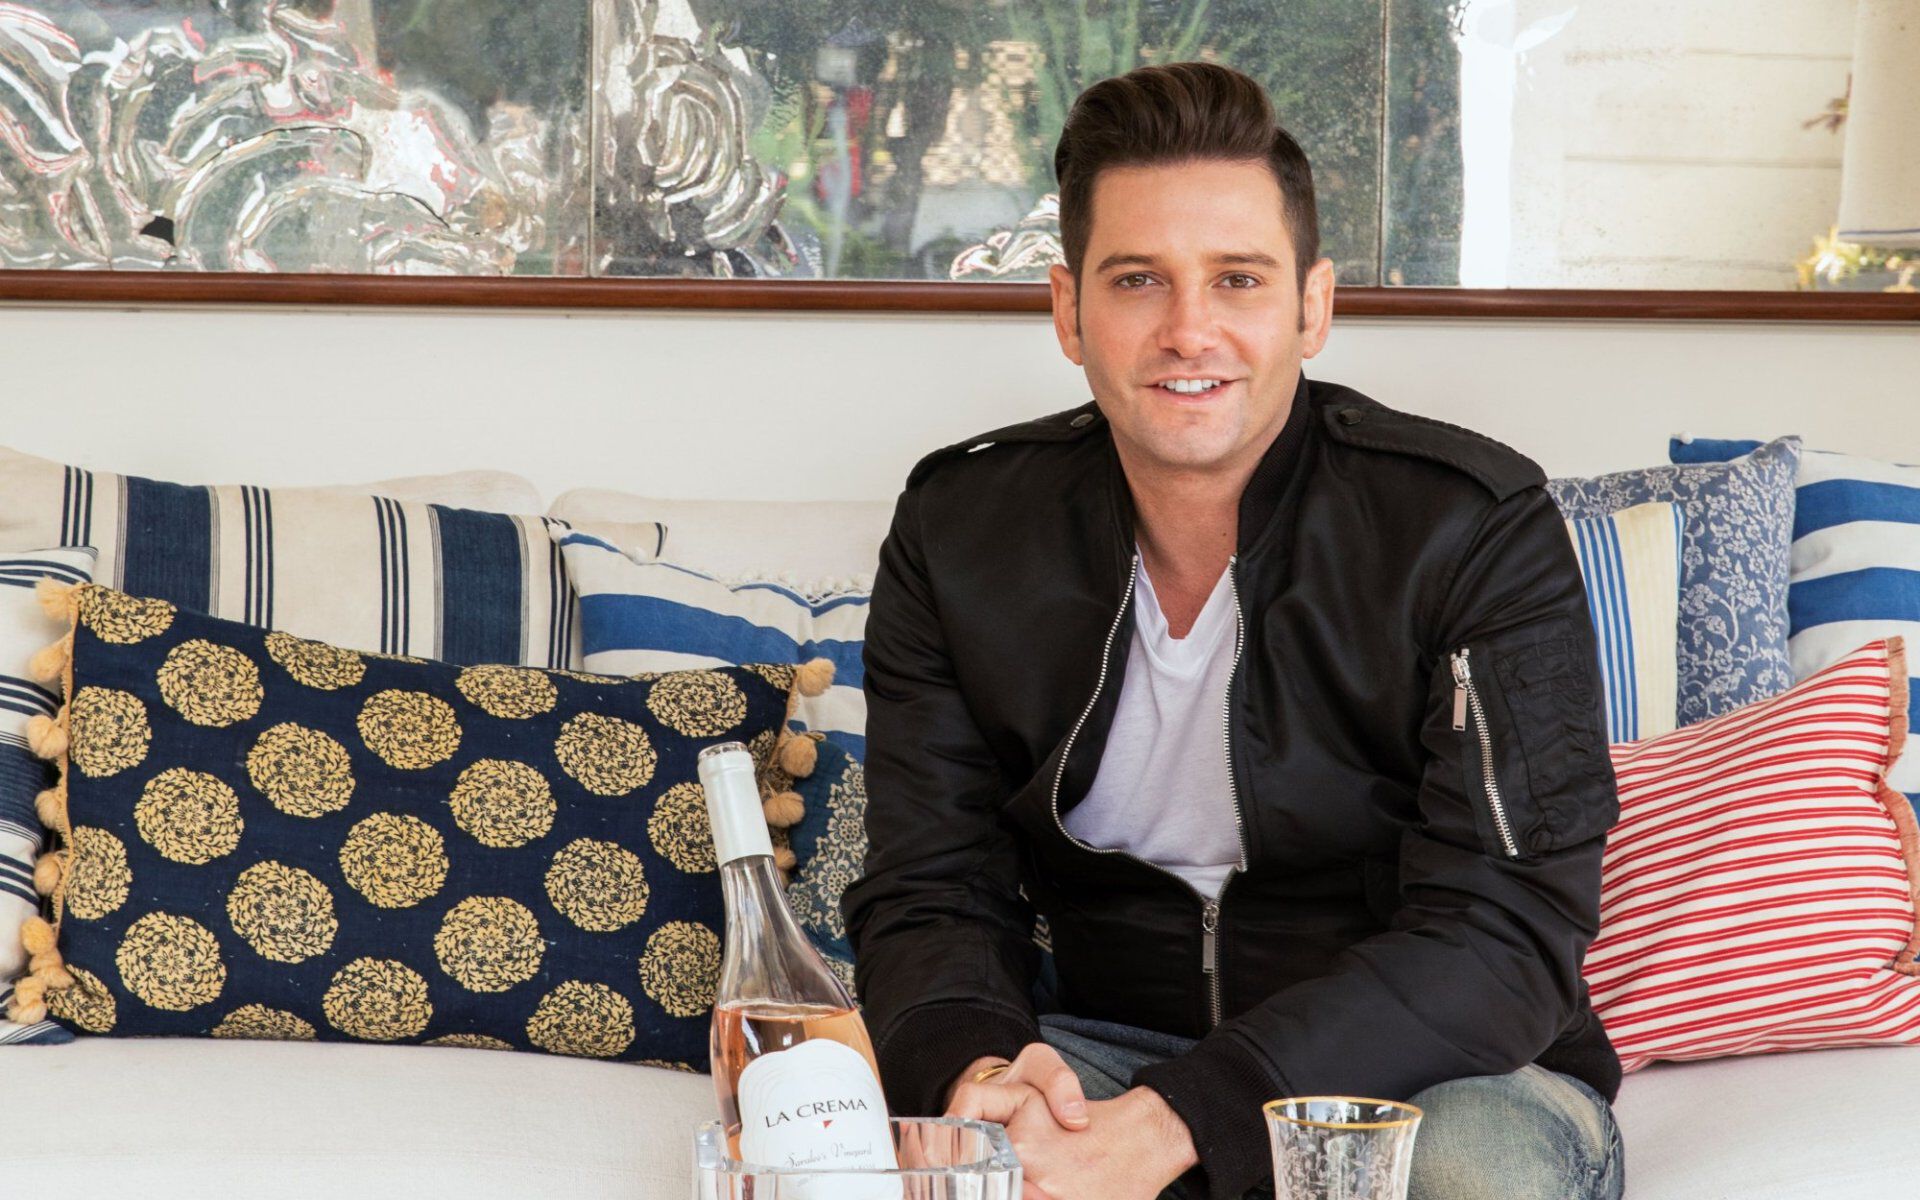 Josh Flagg sitting with wine in ice bucket on table in front of him.